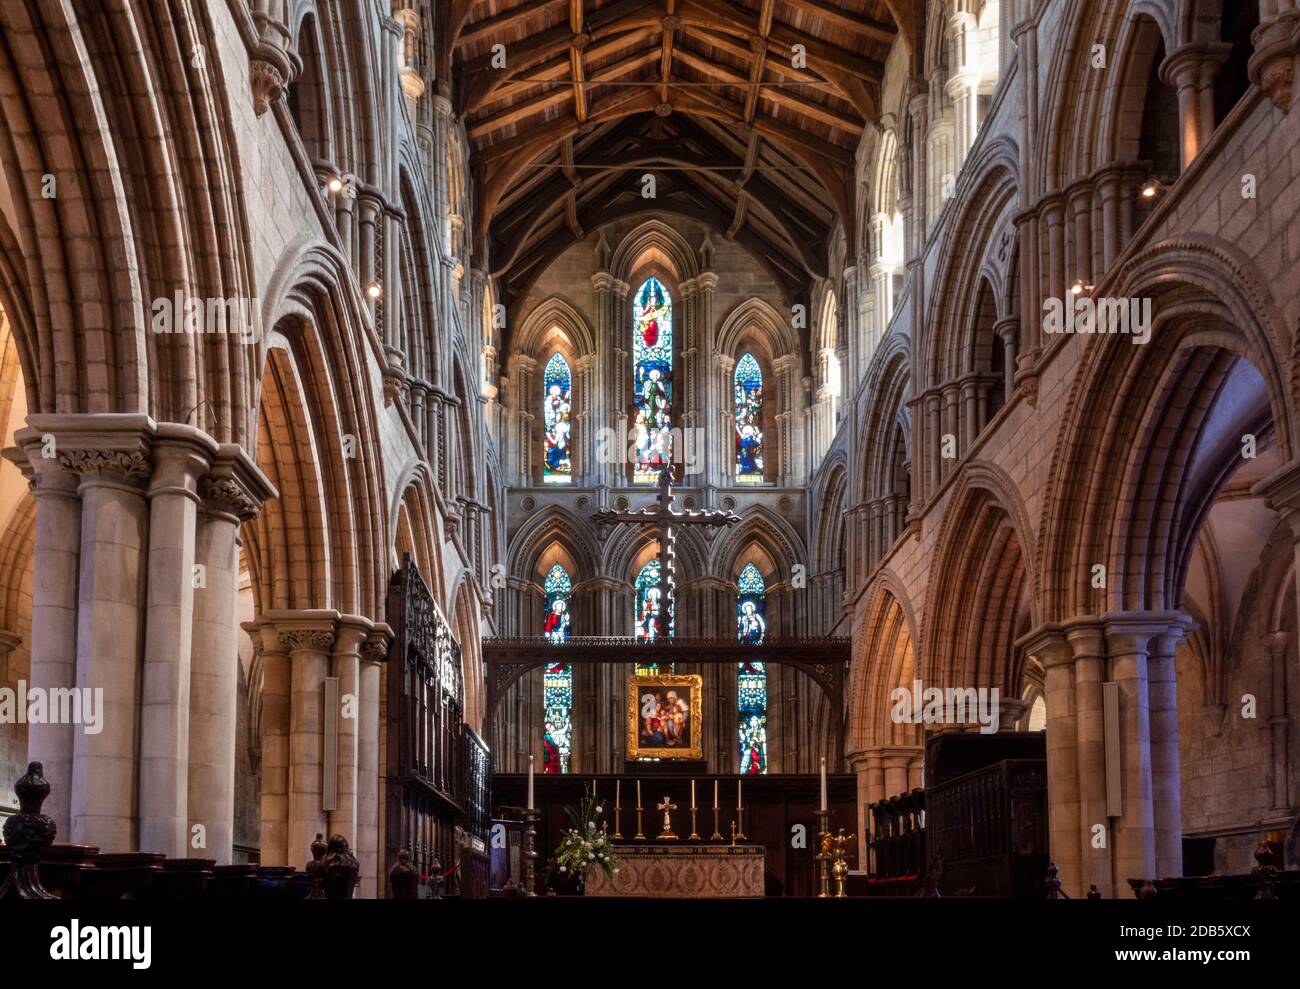 Hexham Abbey, Hexham, Northumberland, England, UK - interior view showing the high altar and choir. Stock Photo